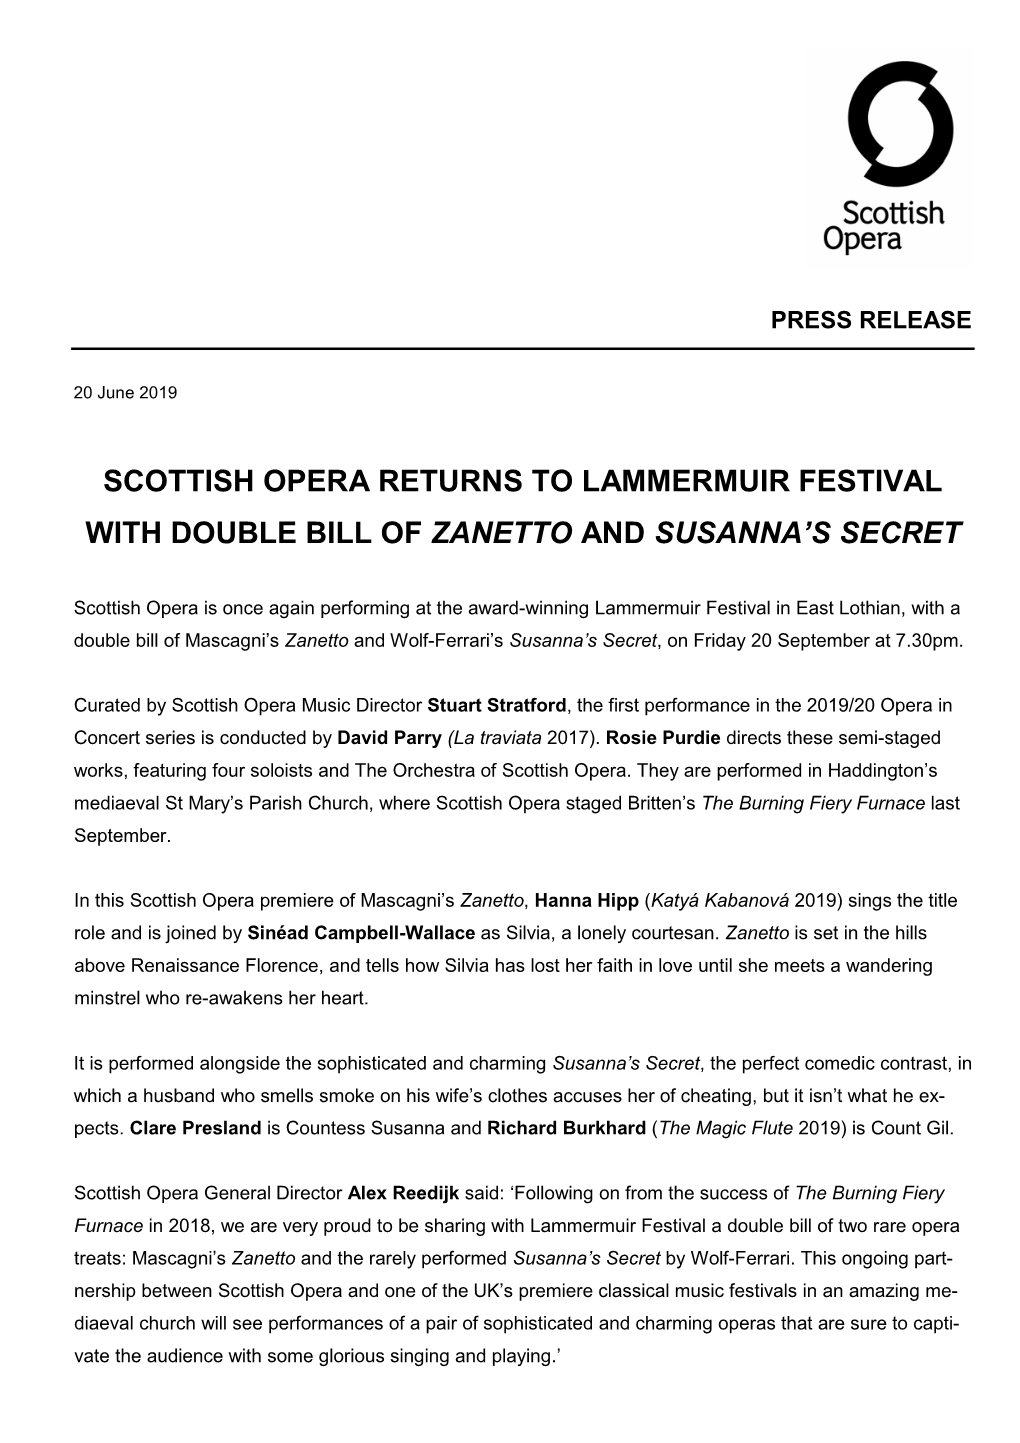 Scottish Opera Returns to Lammermuir Festival with Double Bill of Zanetto and Susanna’S Secret